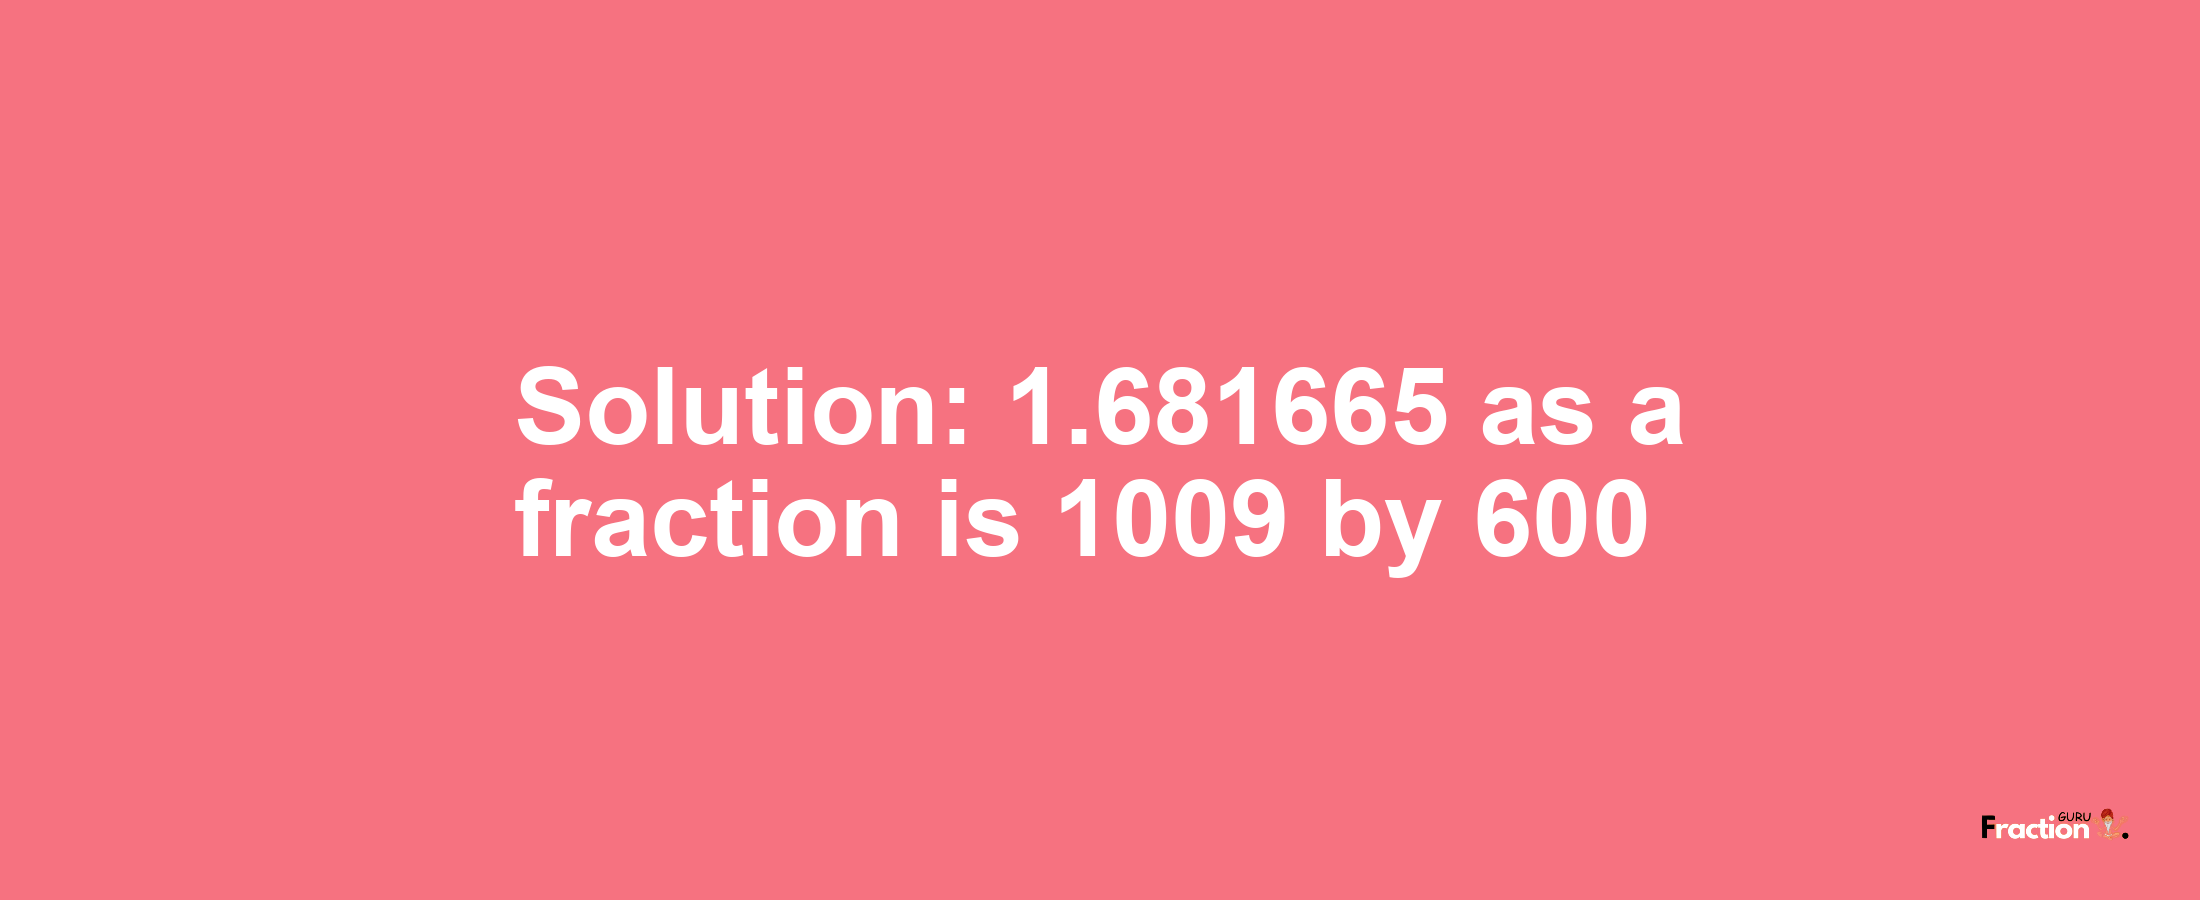 Solution:1.681665 as a fraction is 1009/600